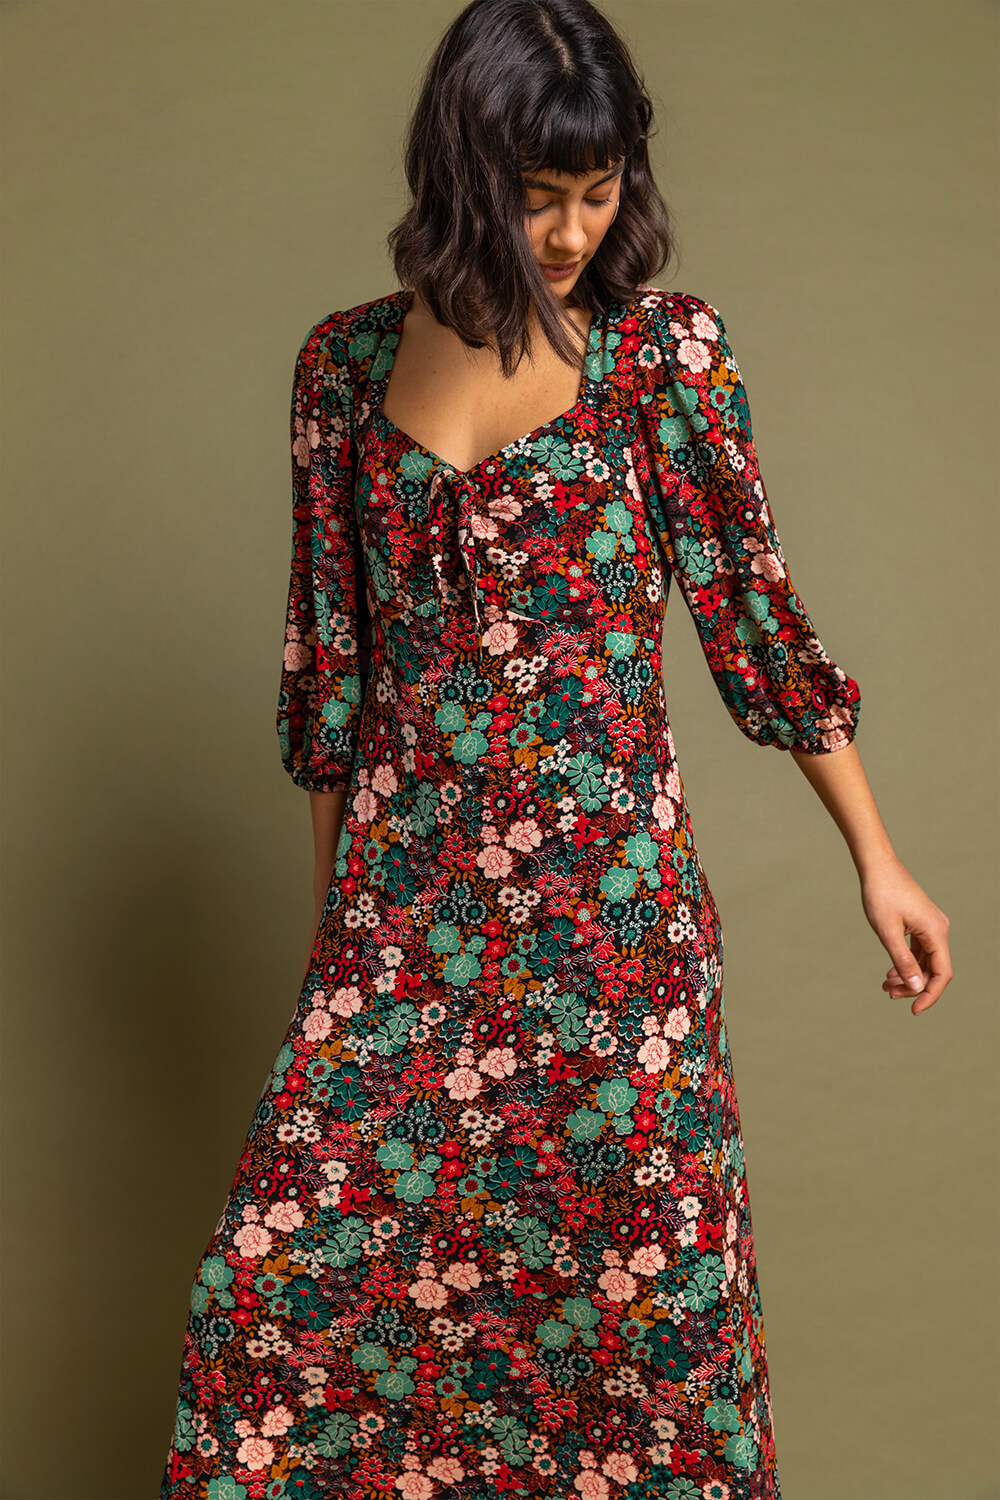 Rust Floral Print Tie Front Midi Dress, Image 4 of 5